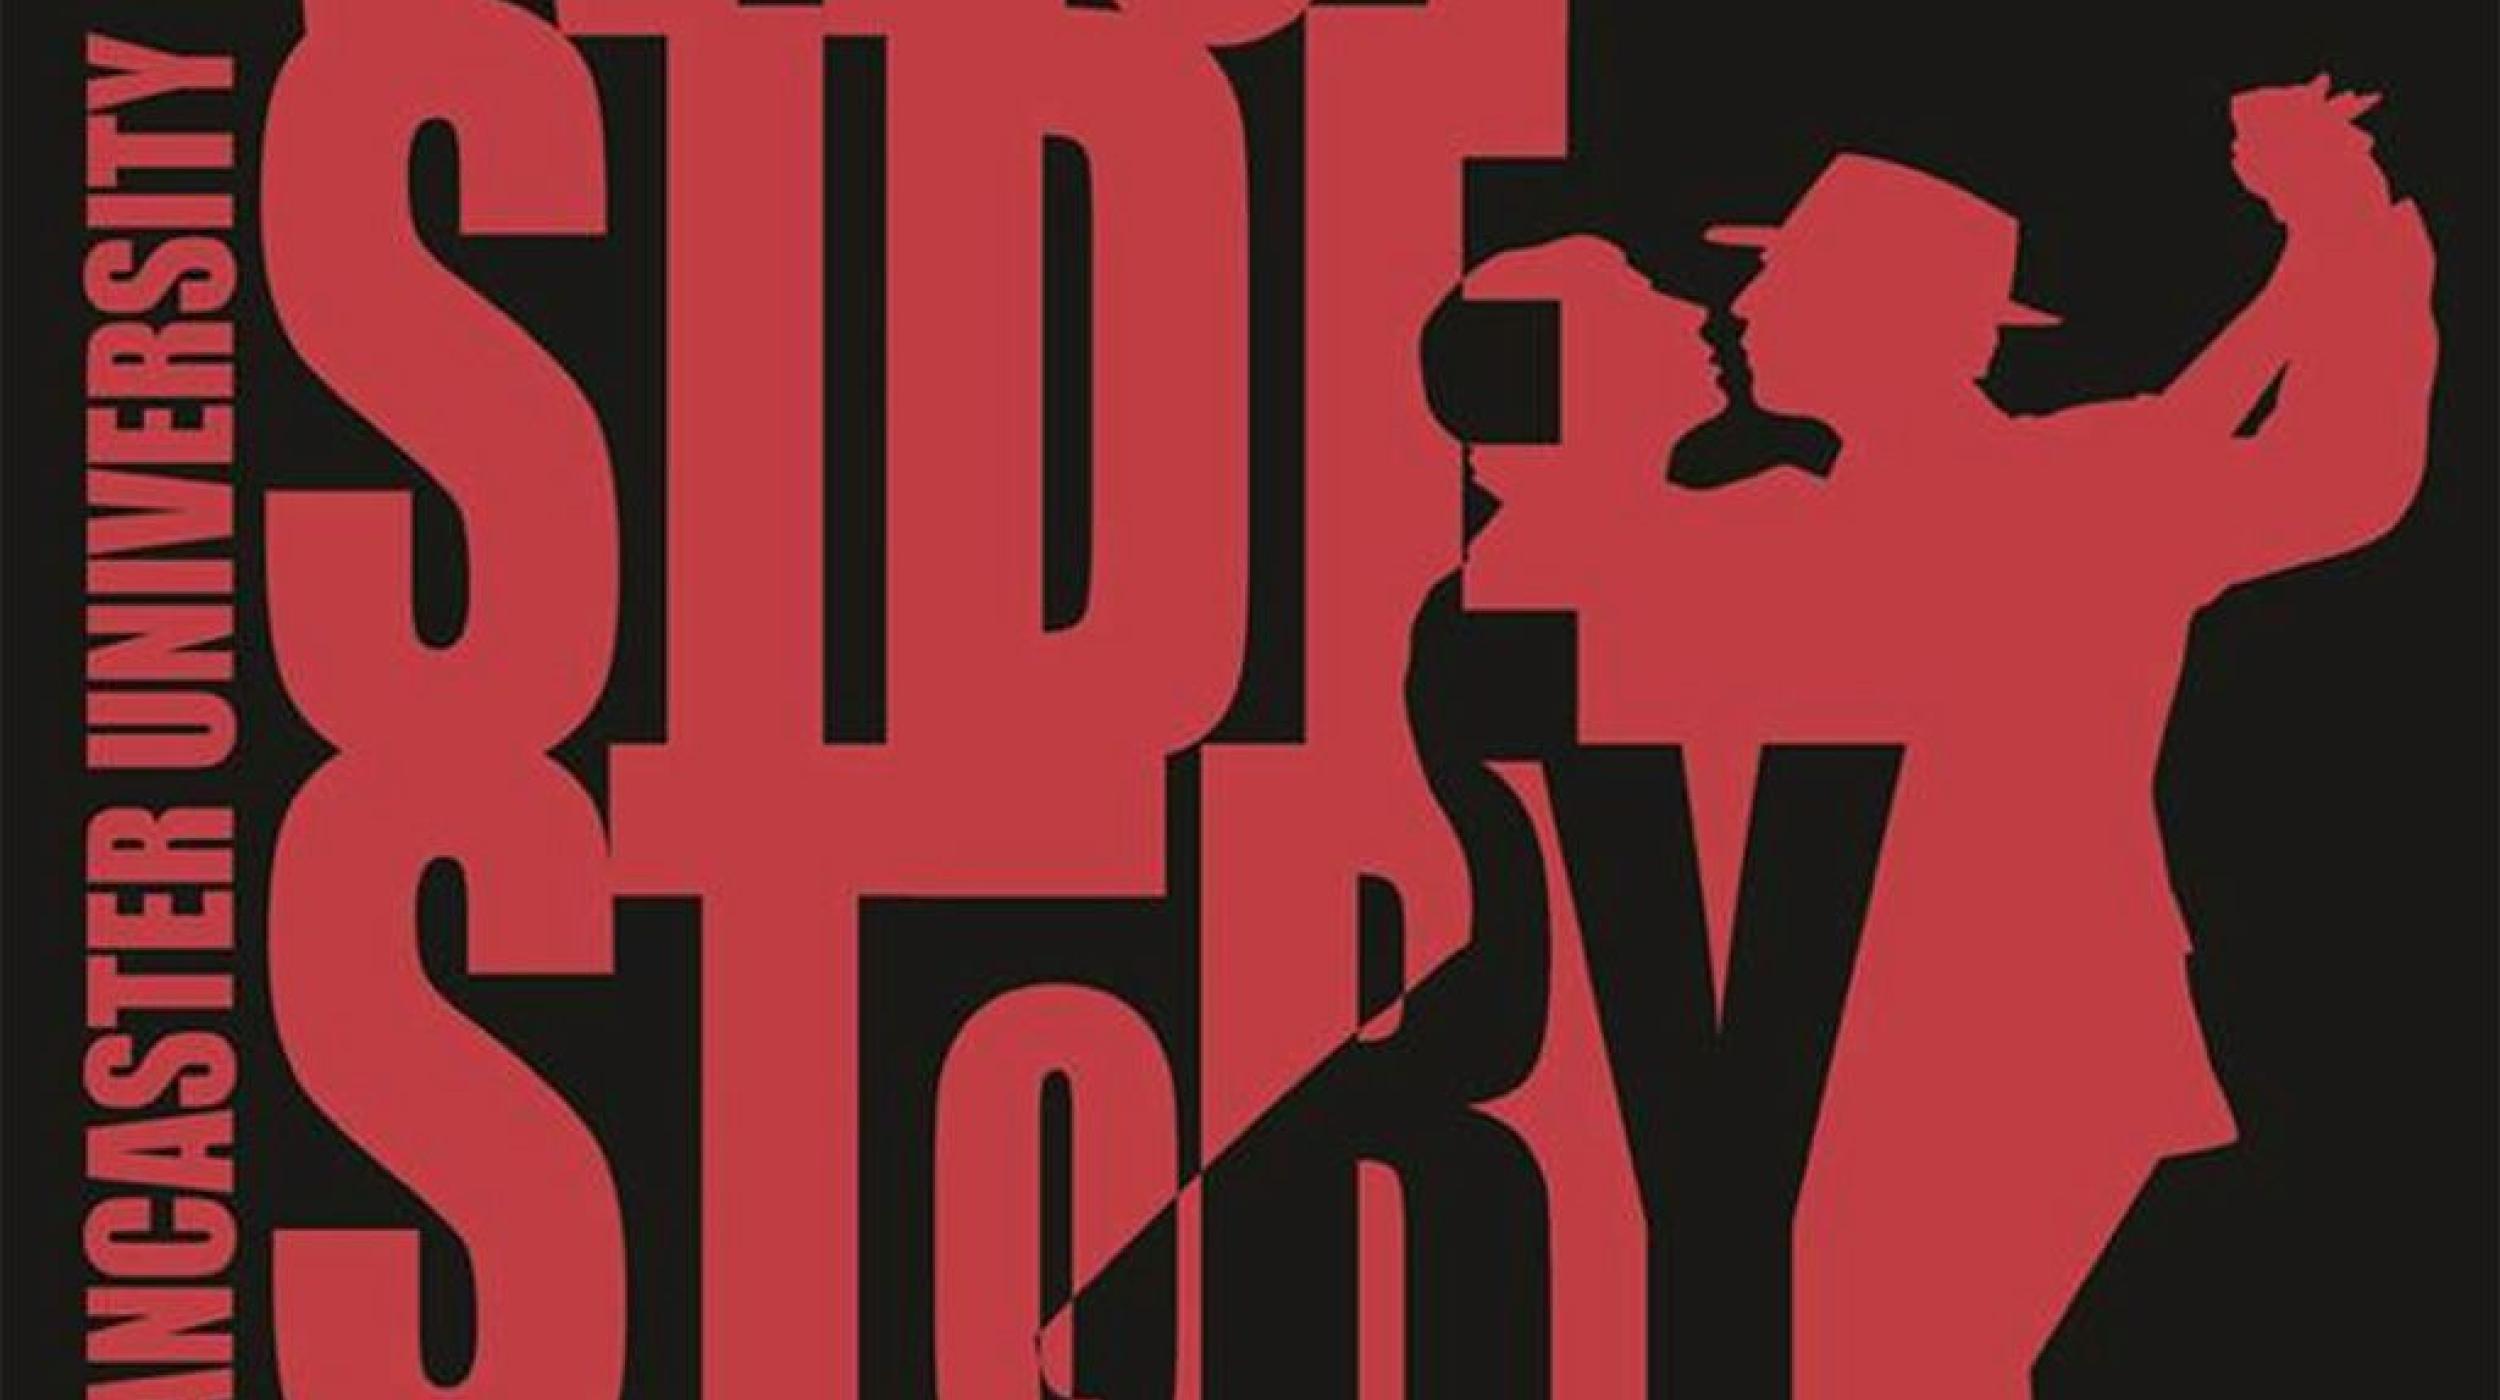 LU Collab presents West Side Story